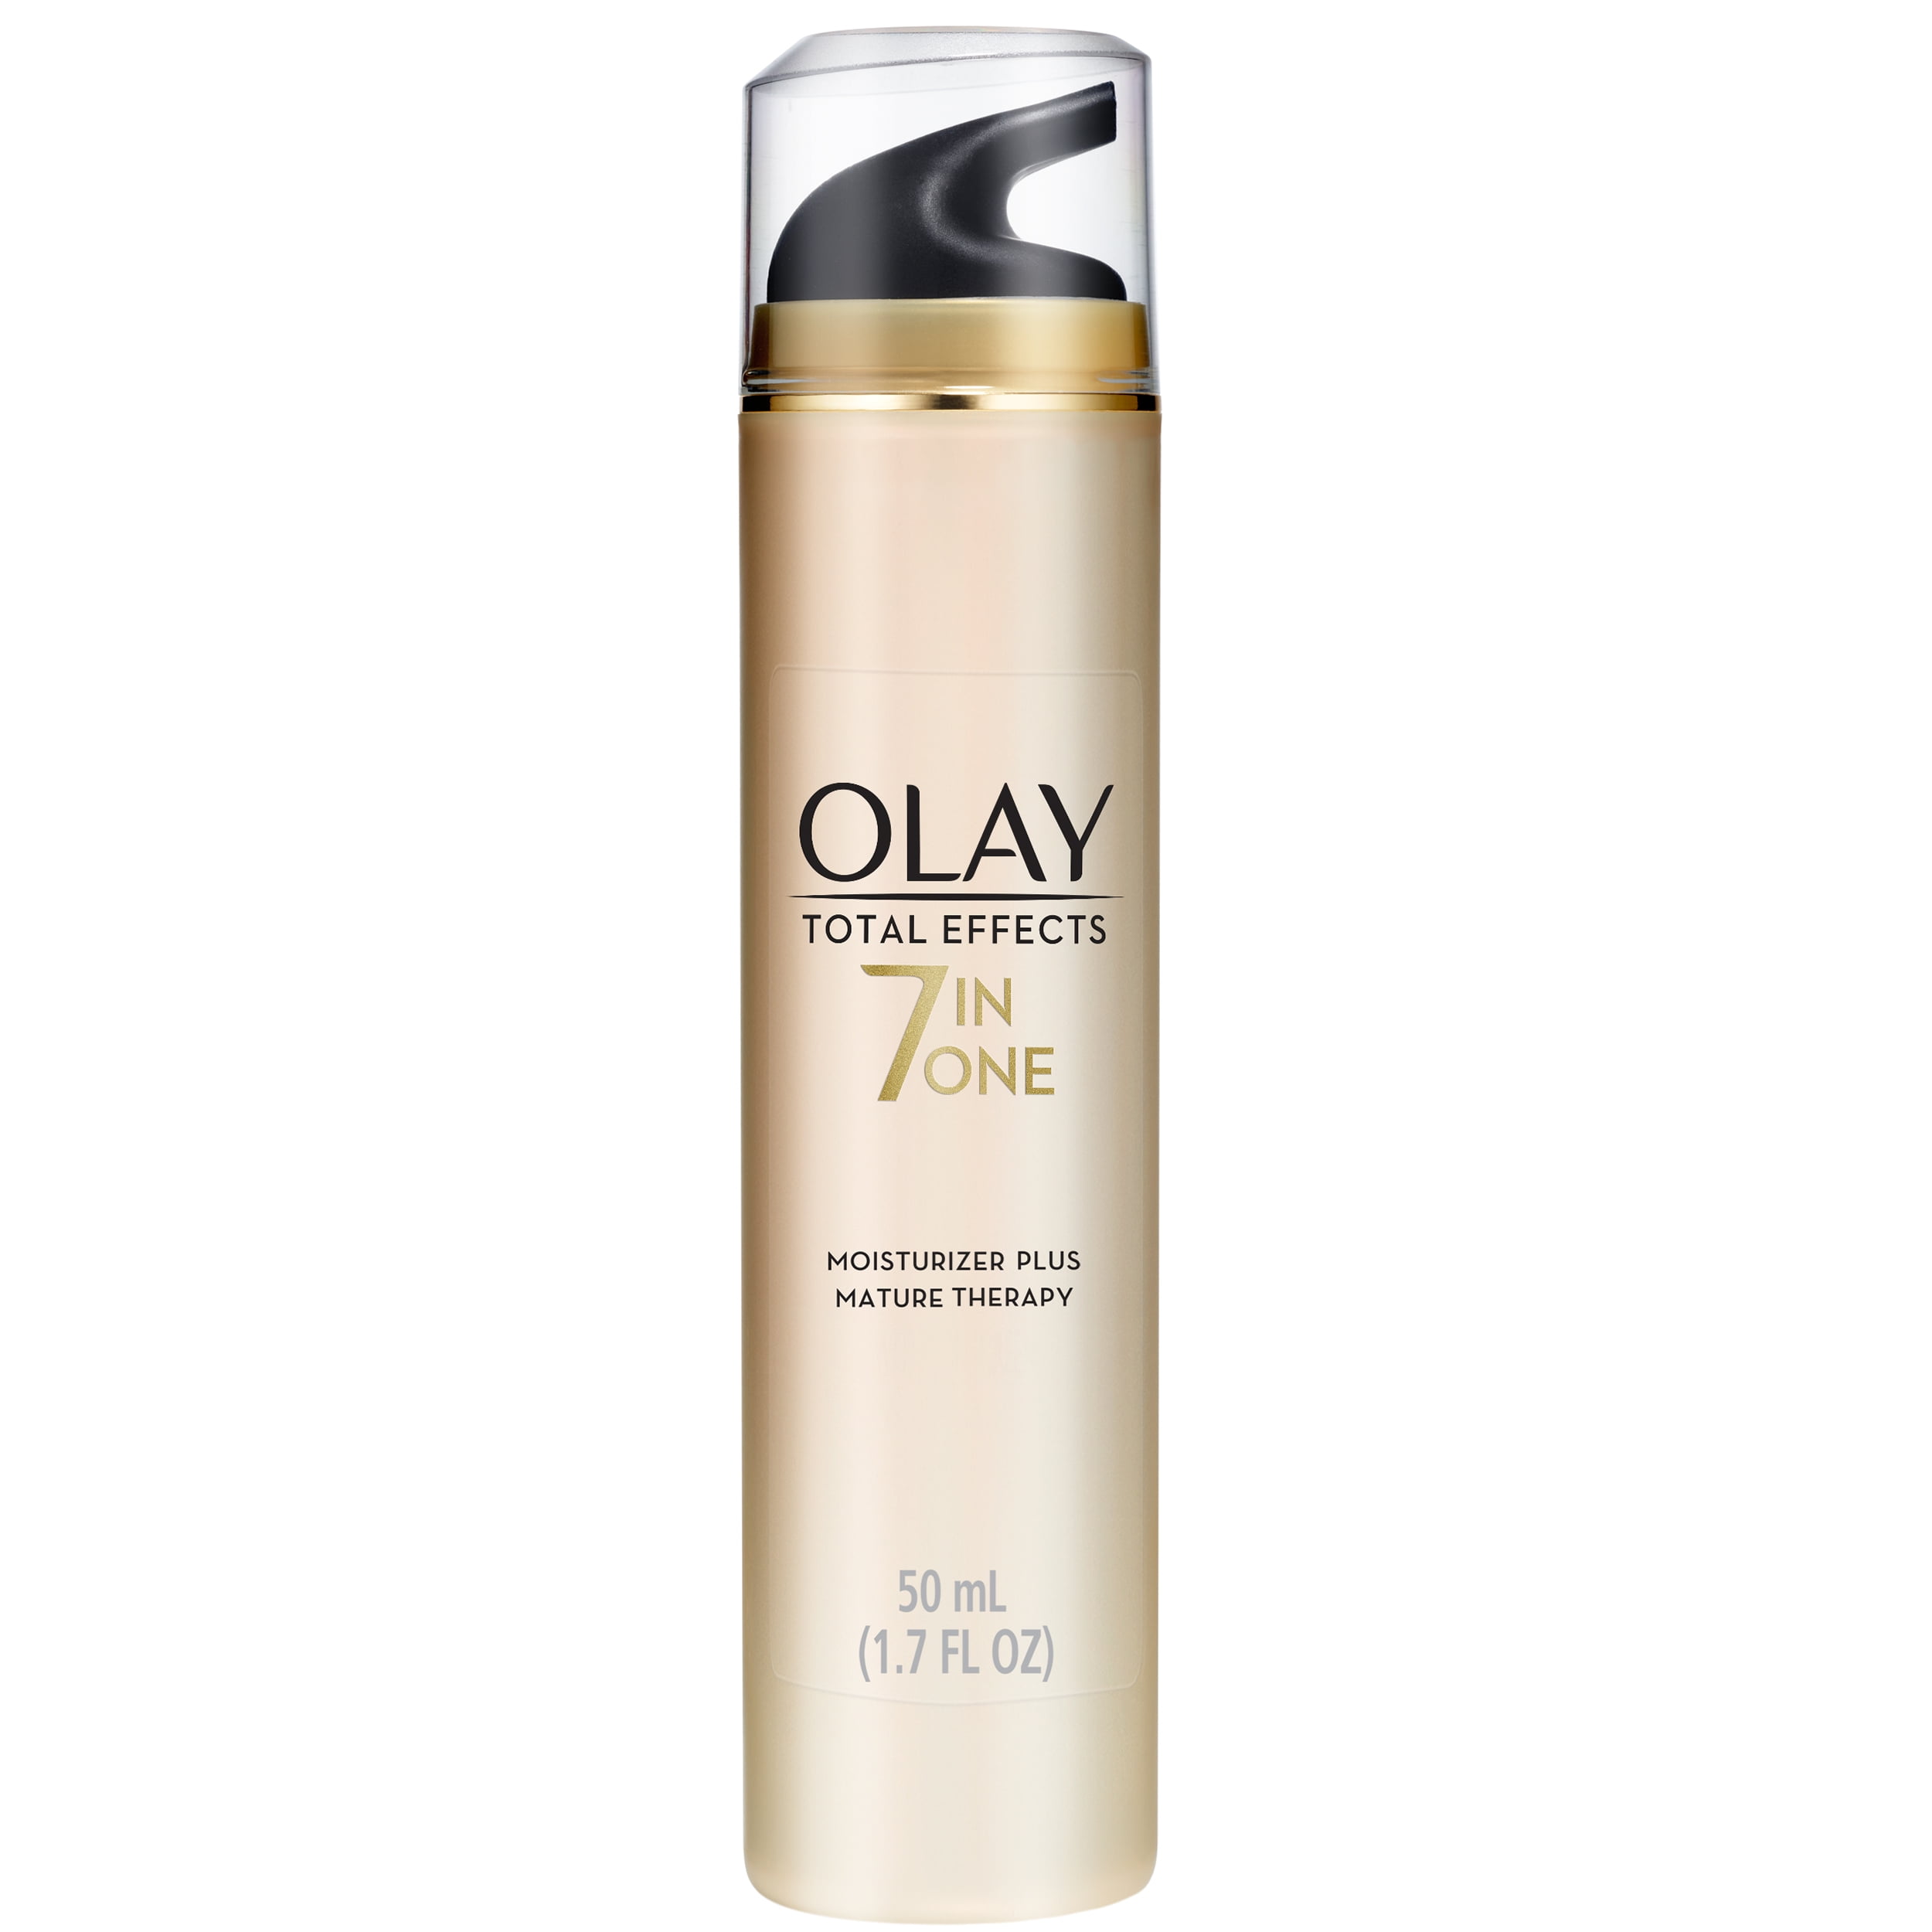 Olay Total Effects Face Moisturizer Plus Mature Therapy, 1.7 fl oz - Walmar...